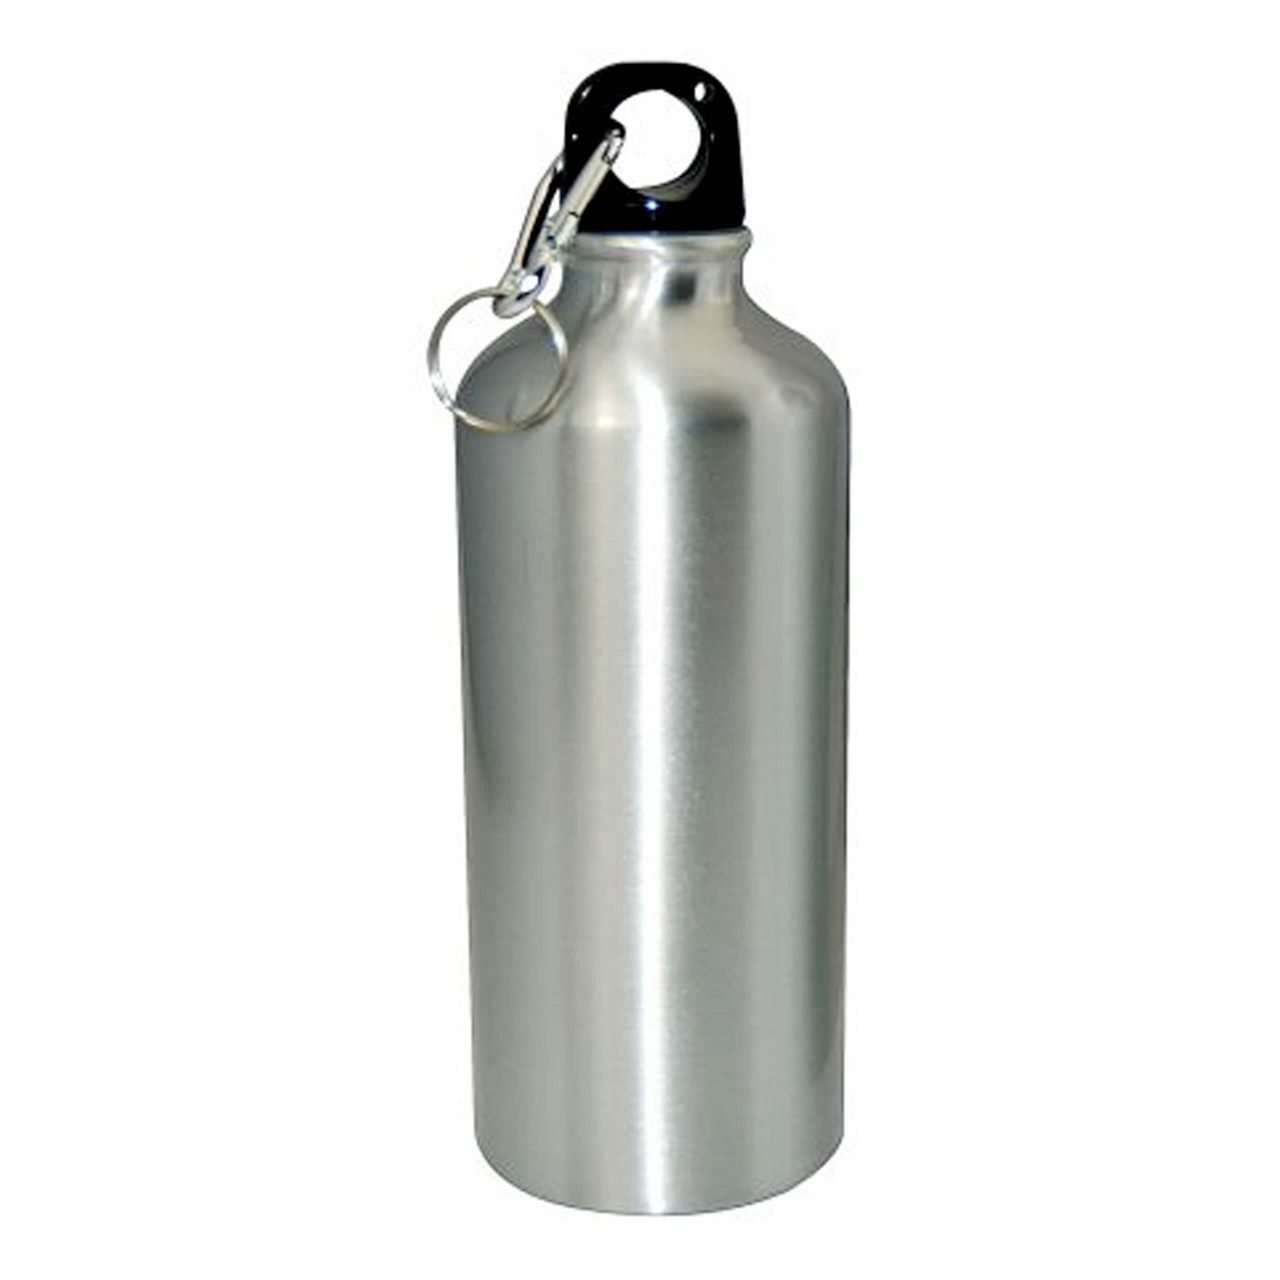 Stainless Steel Sublimation Thermos Drink Bottle 590 ml / 20oz - White